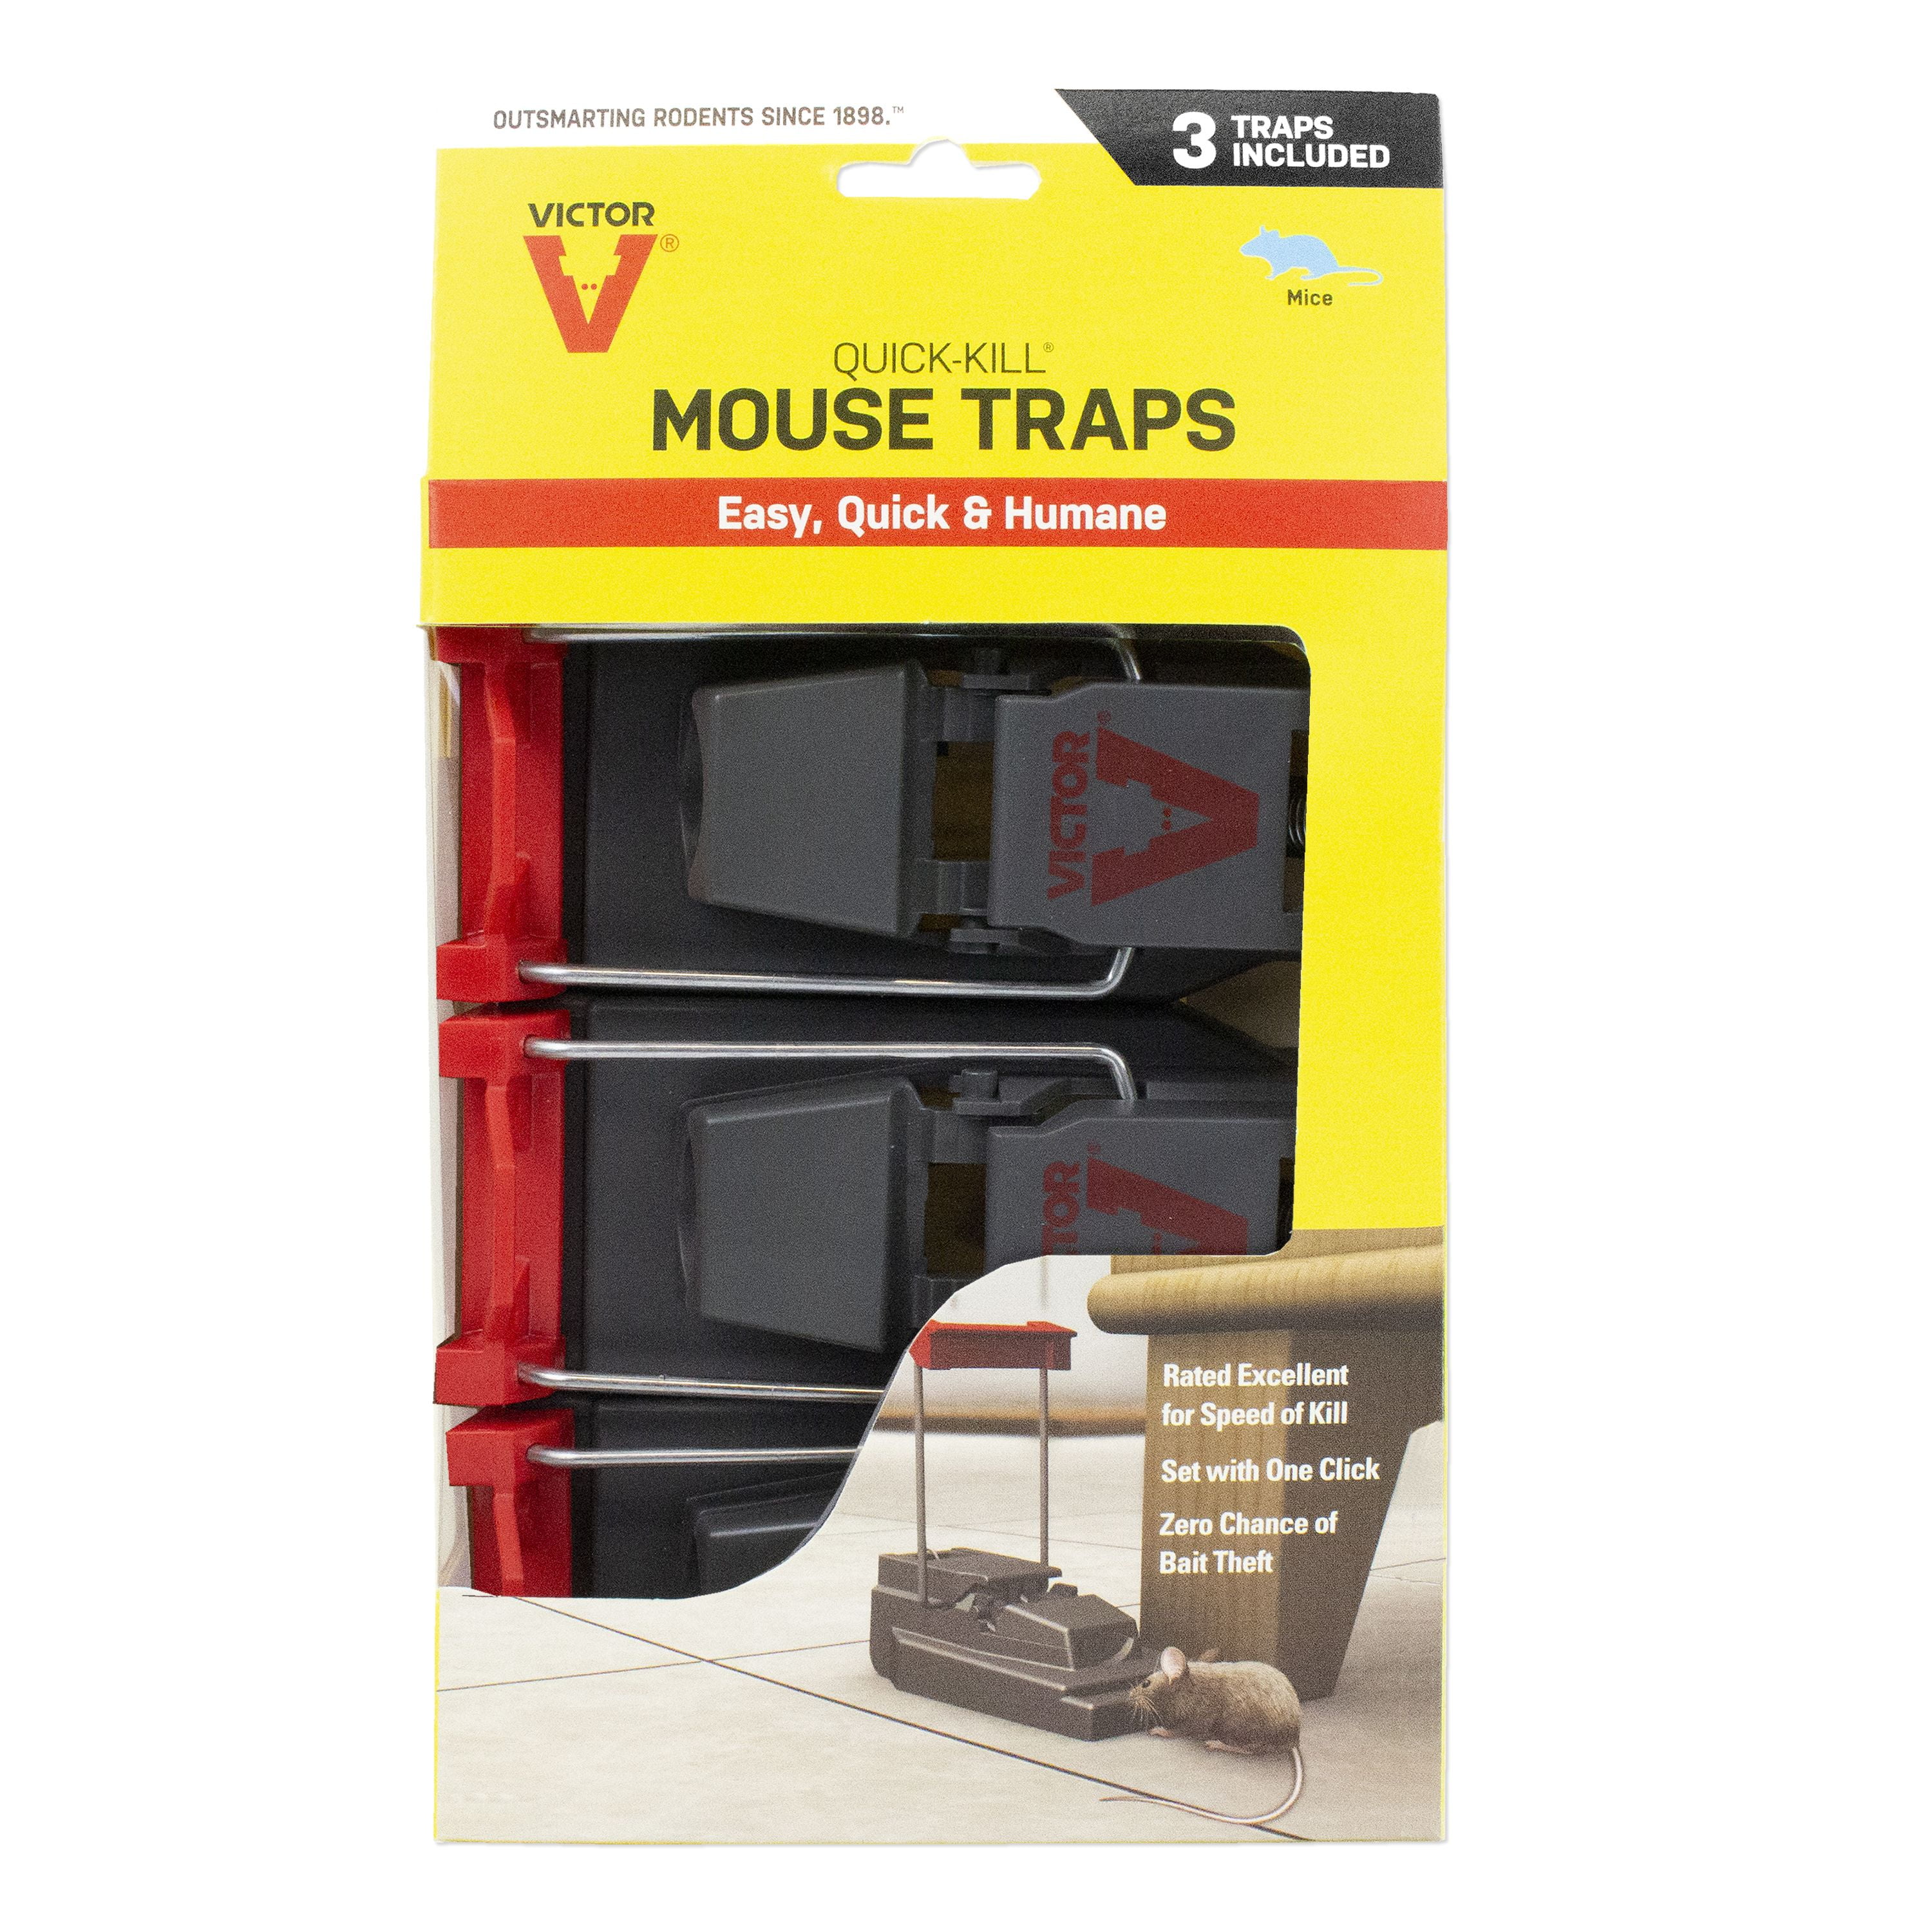 Victor: A Better Mouse Trap